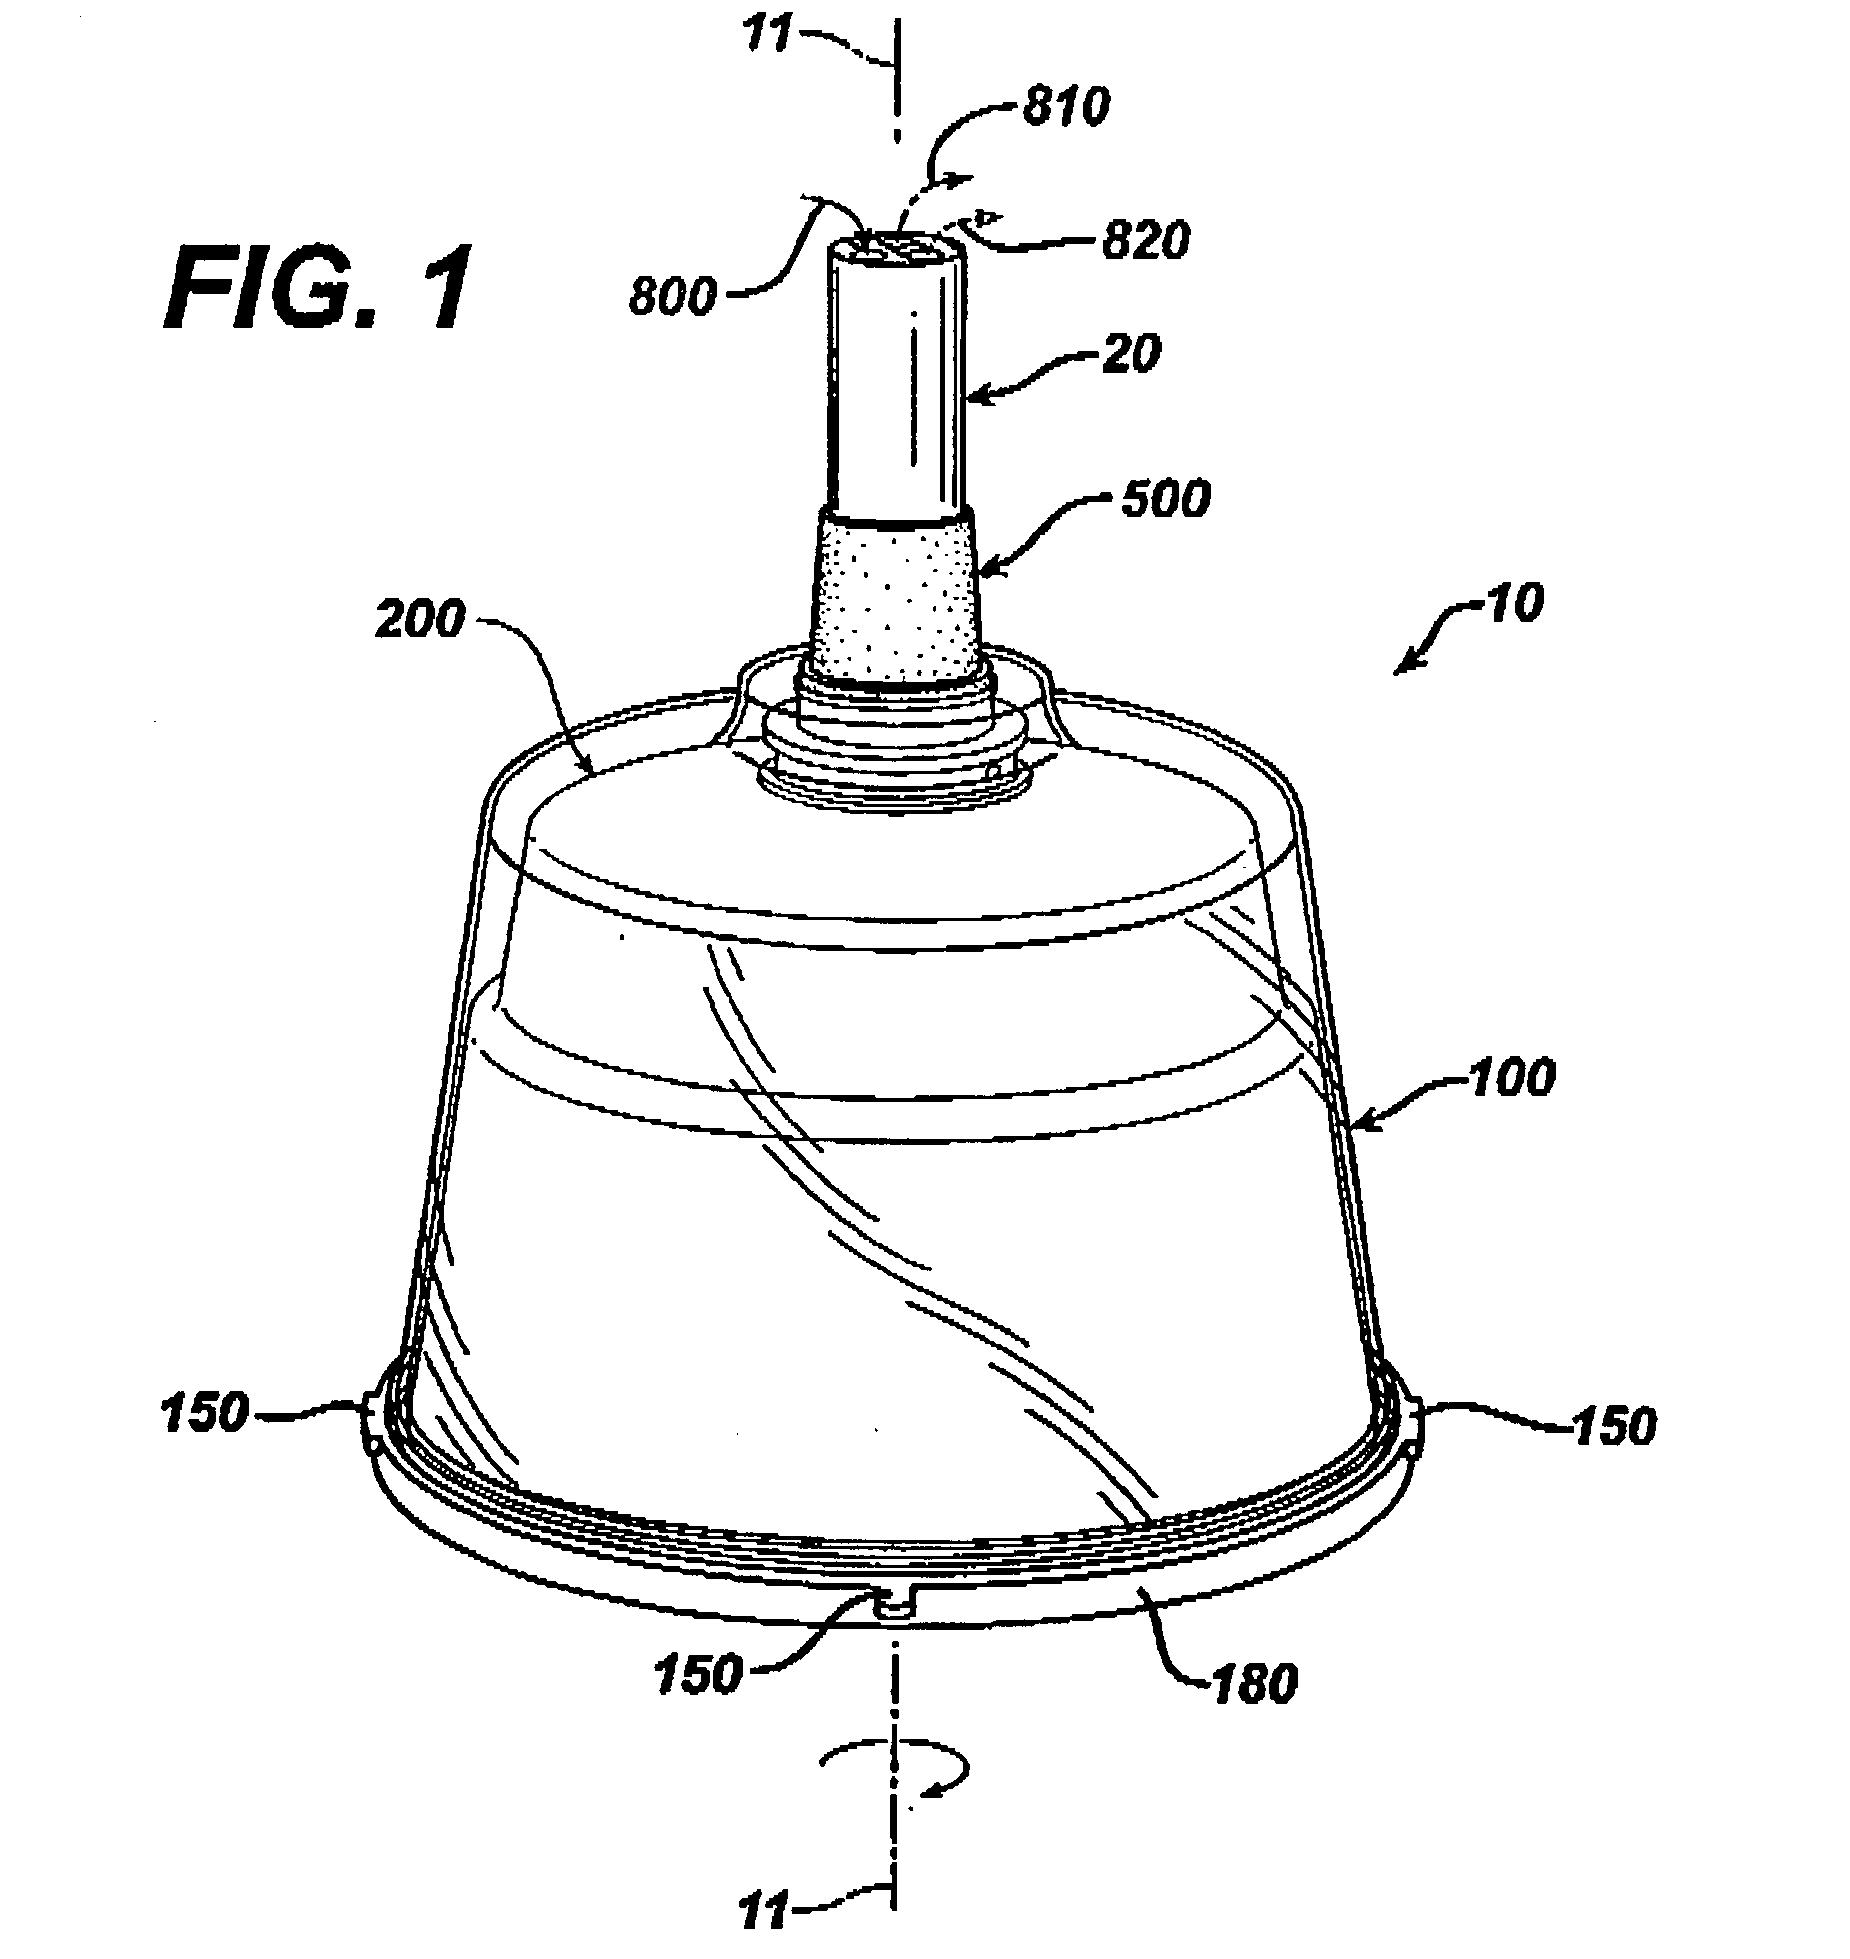 Method and apparatus for the continuous separation of biological fluids into components